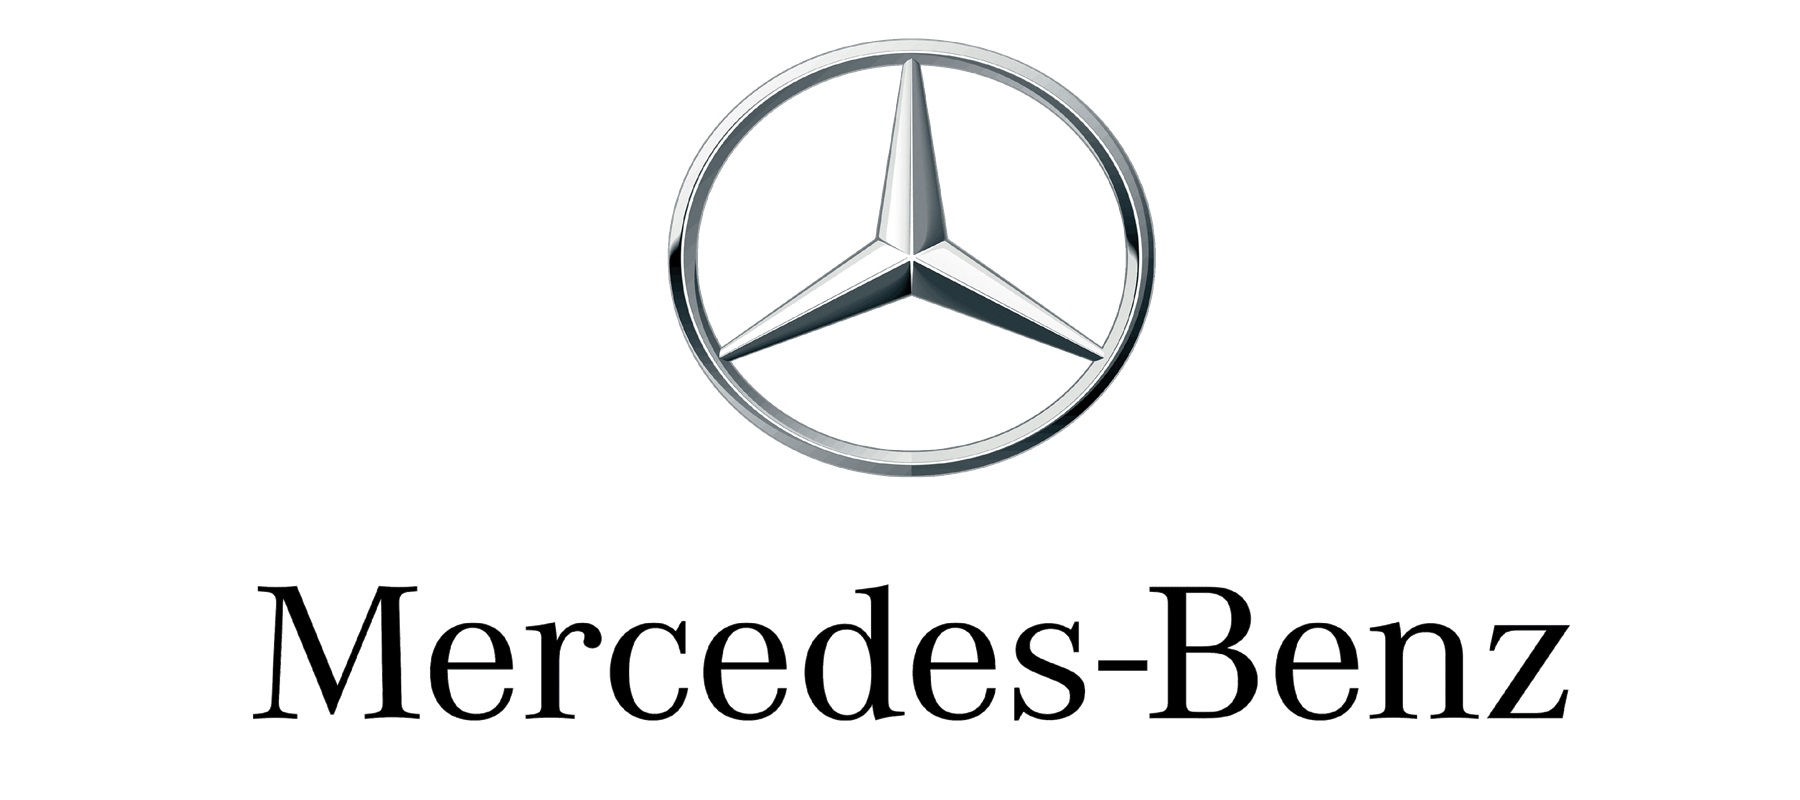 Mercedes-Benz launches “holidays with love” global campaign to celebrate connections and community